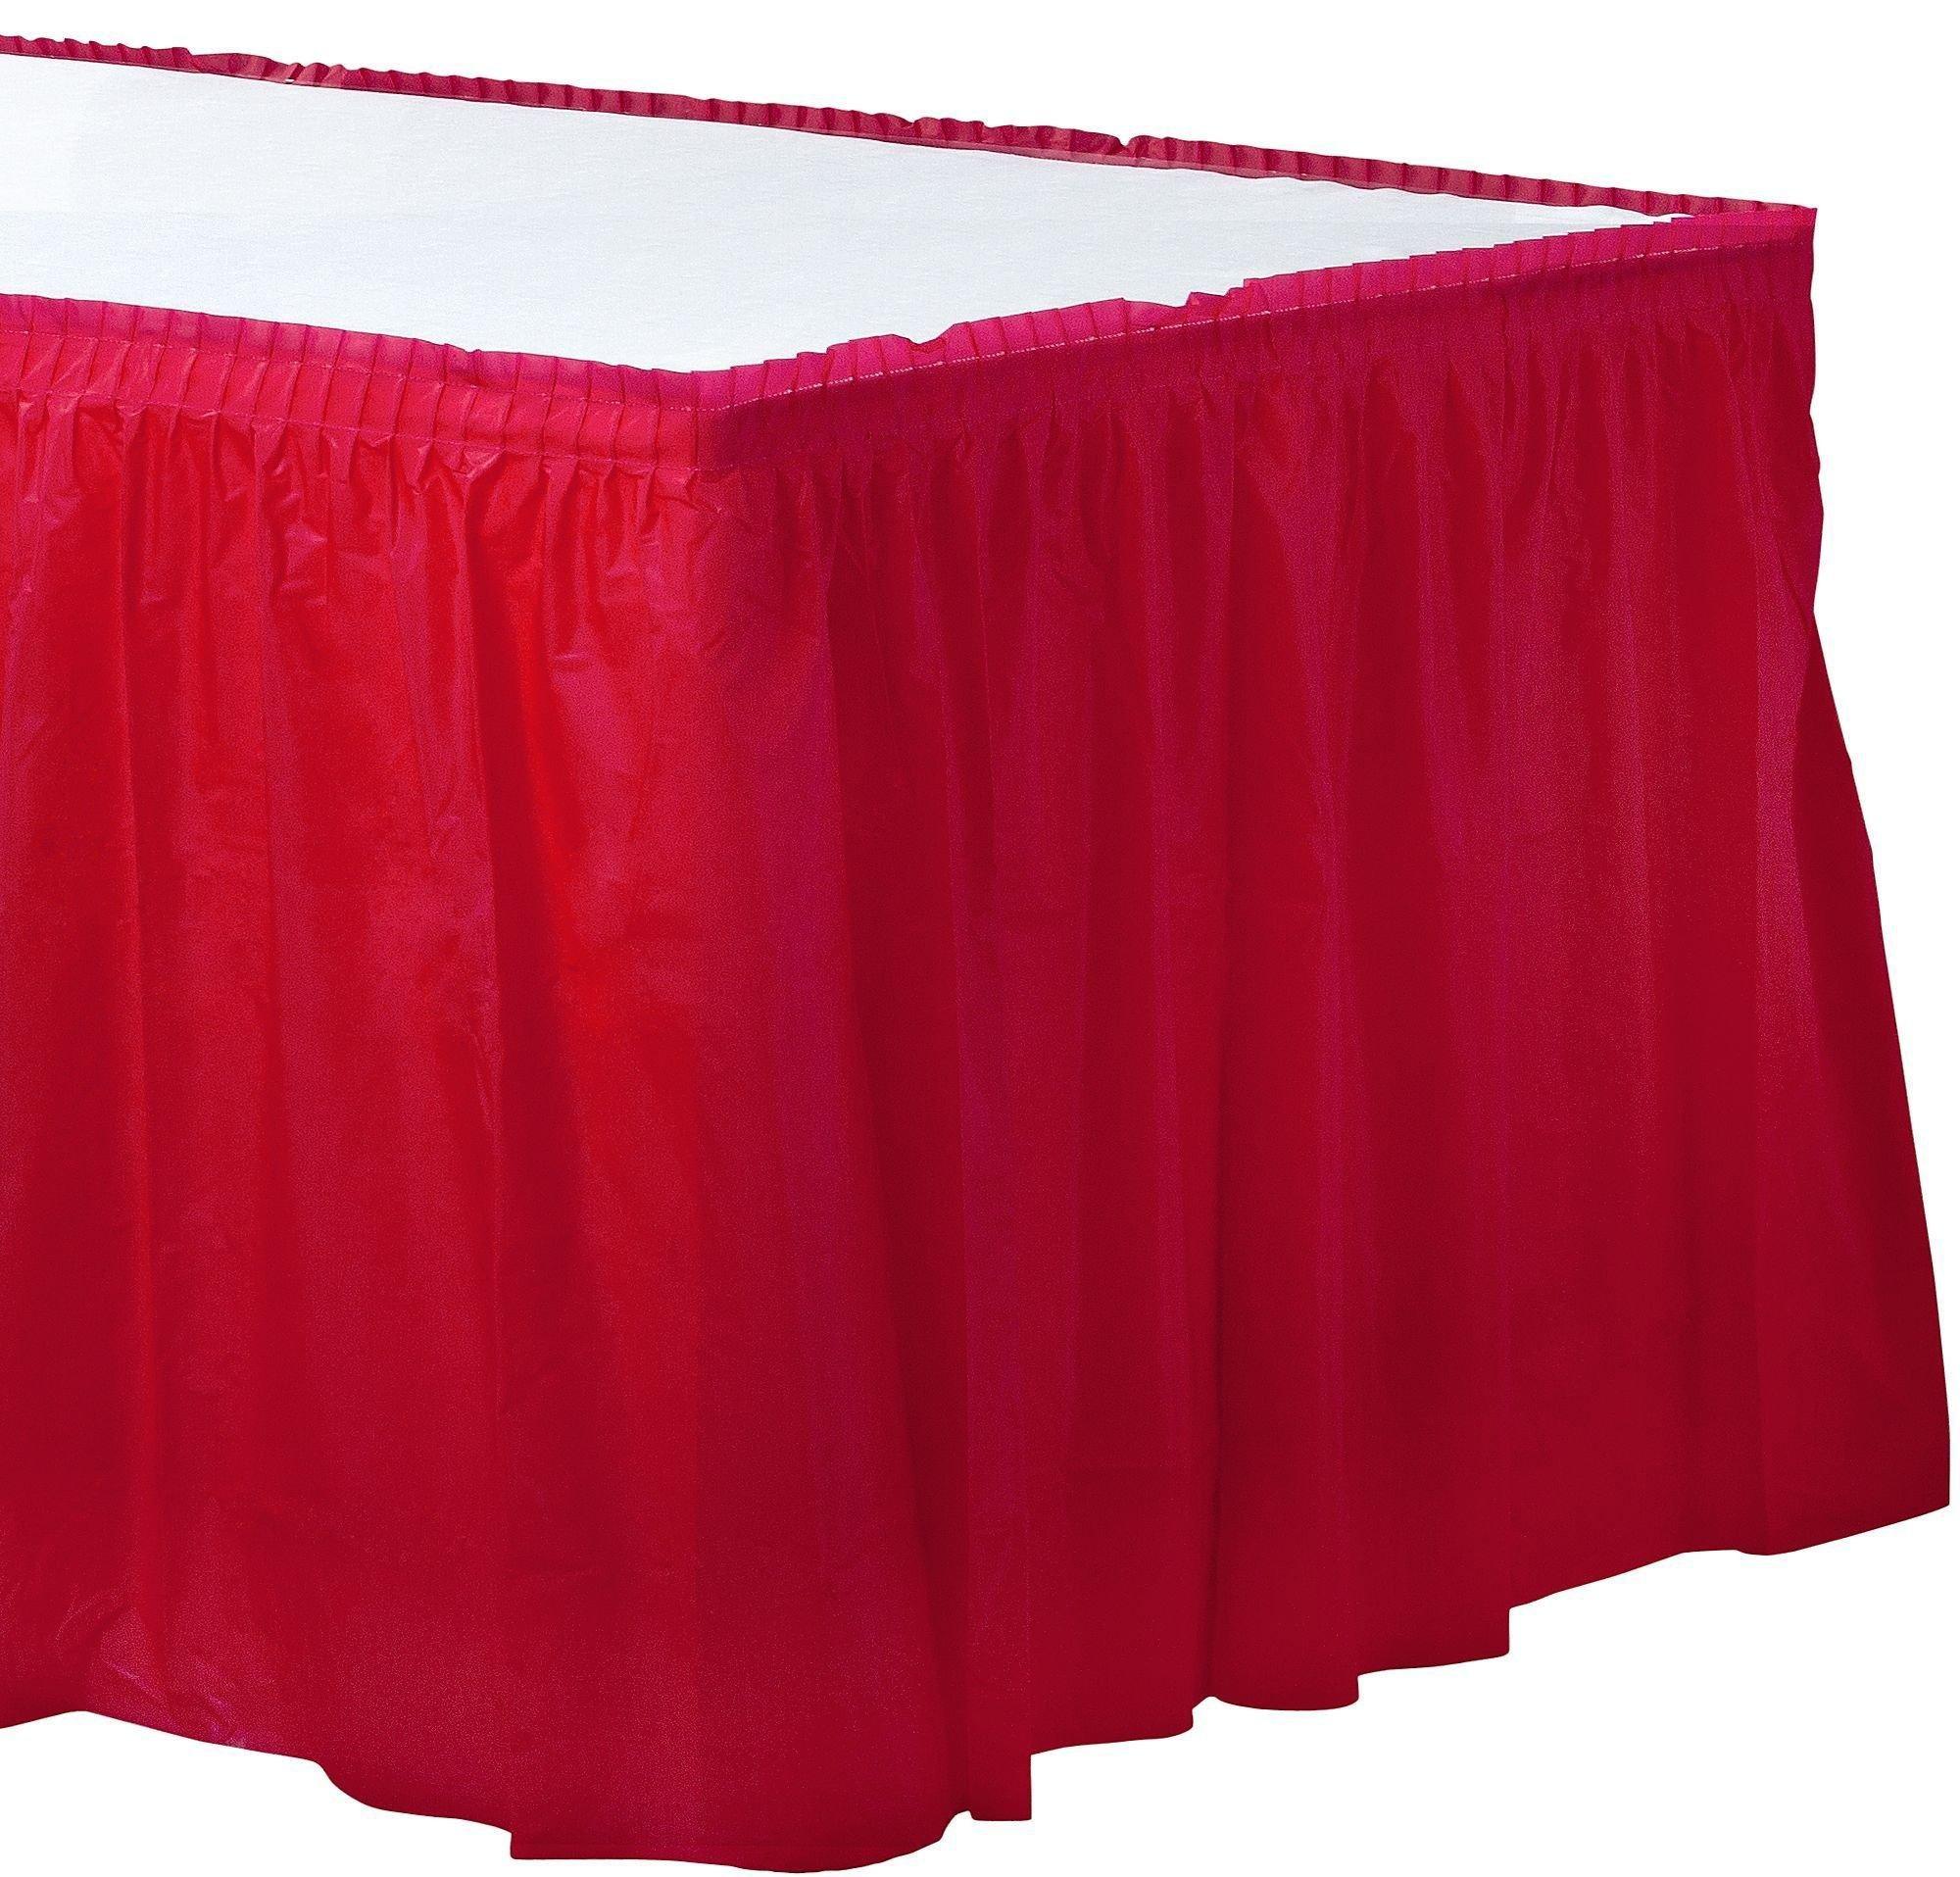 Red Plastic Table Skirt, 21ft x 29in